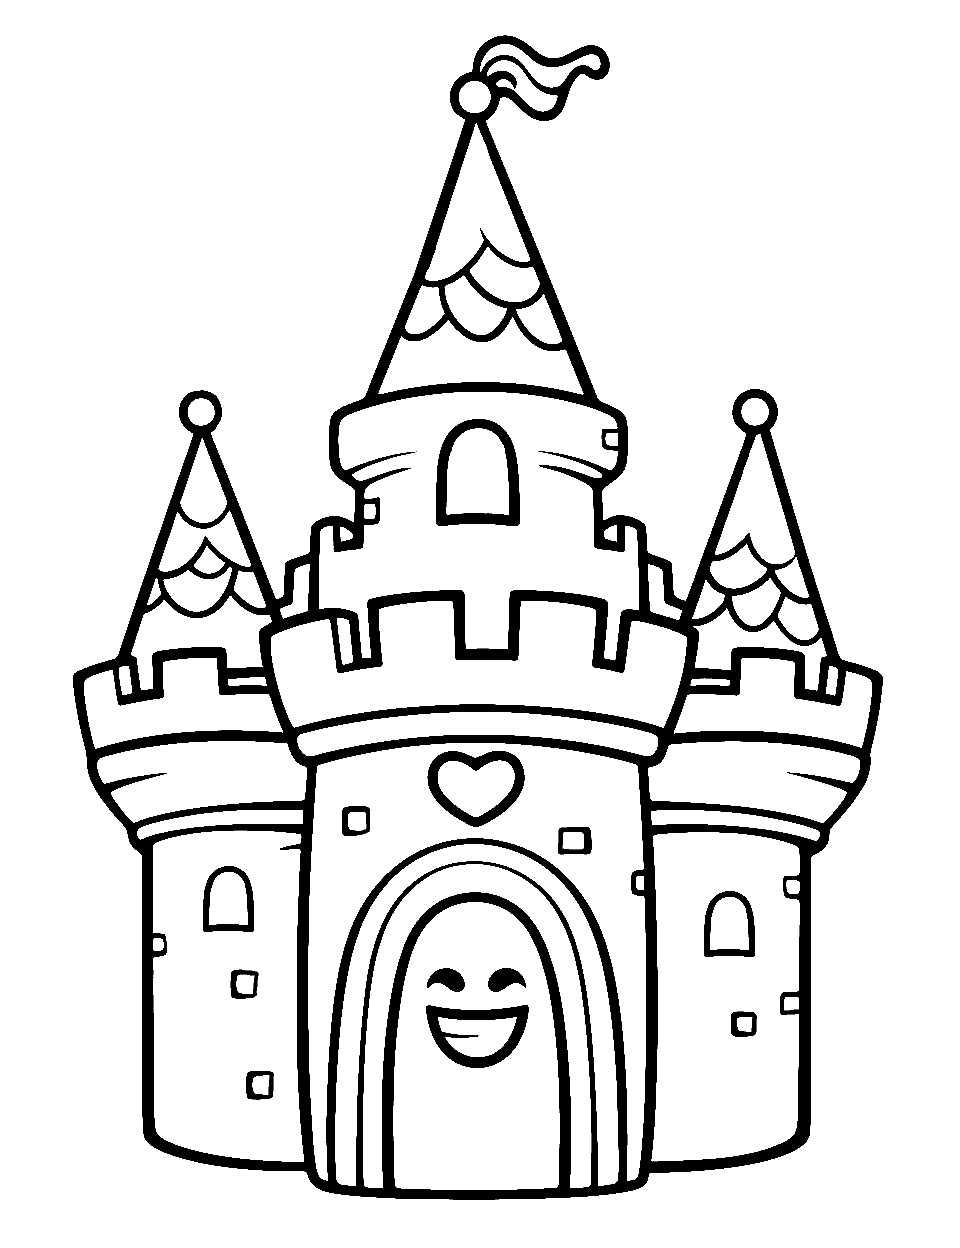 Majestic Shopkin Castle Coloring Page - A grand castle with intricate details built to house Shopkins.